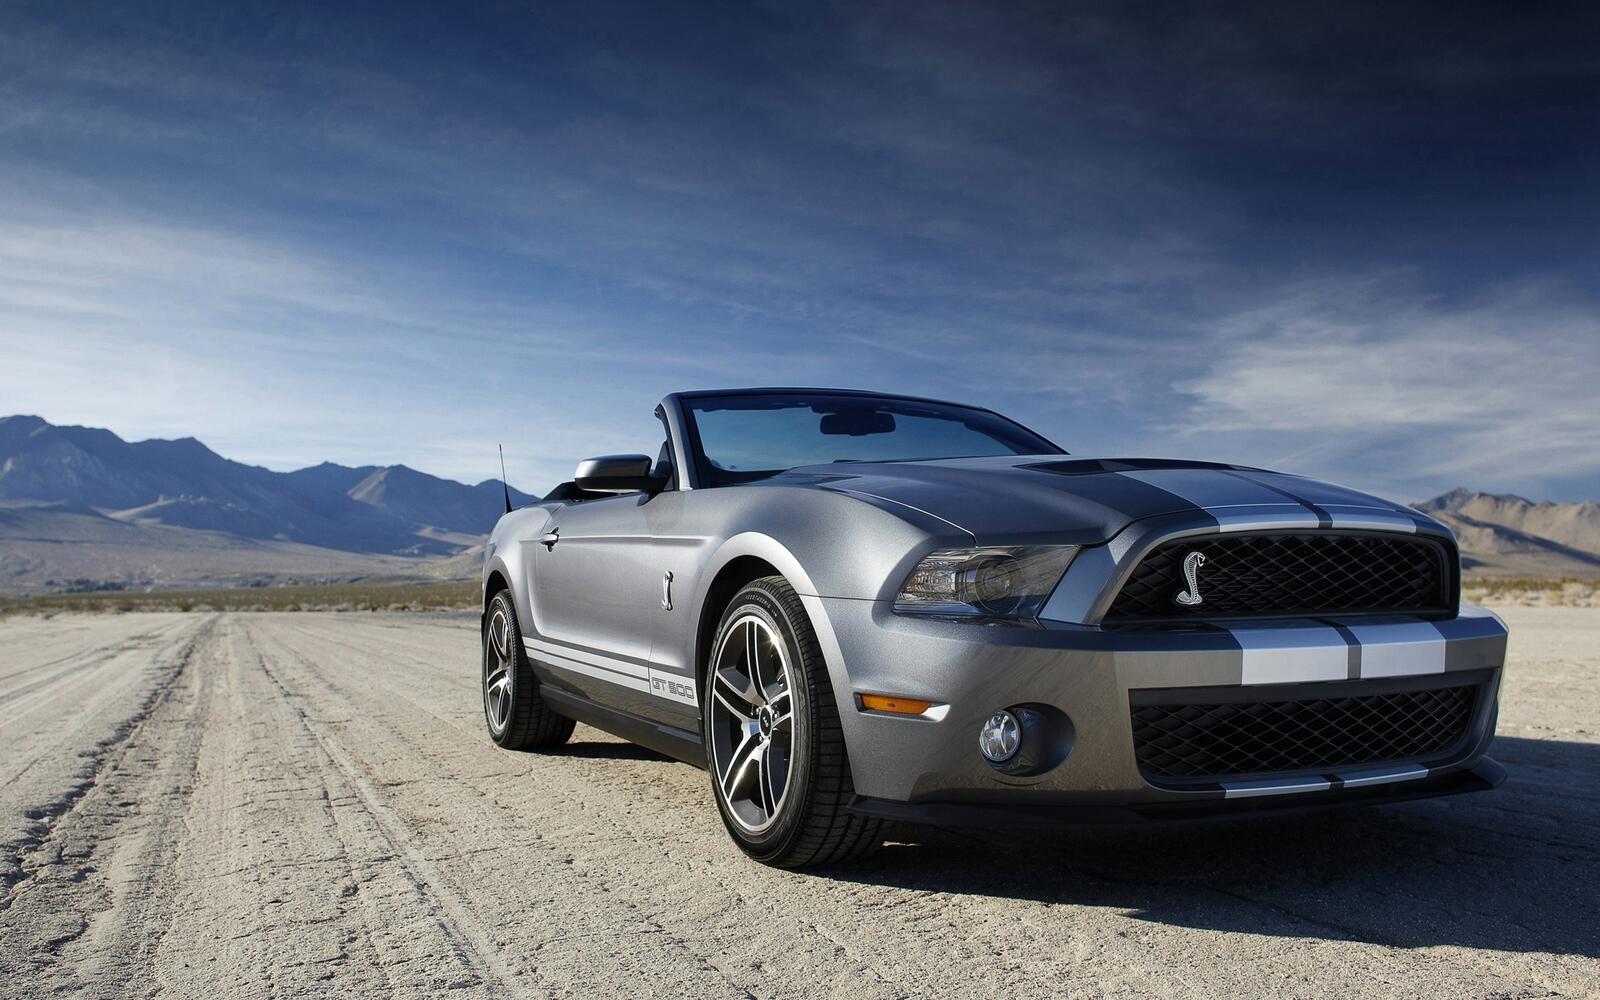 Wallpapers Ford Mustang Convertible on the desktop